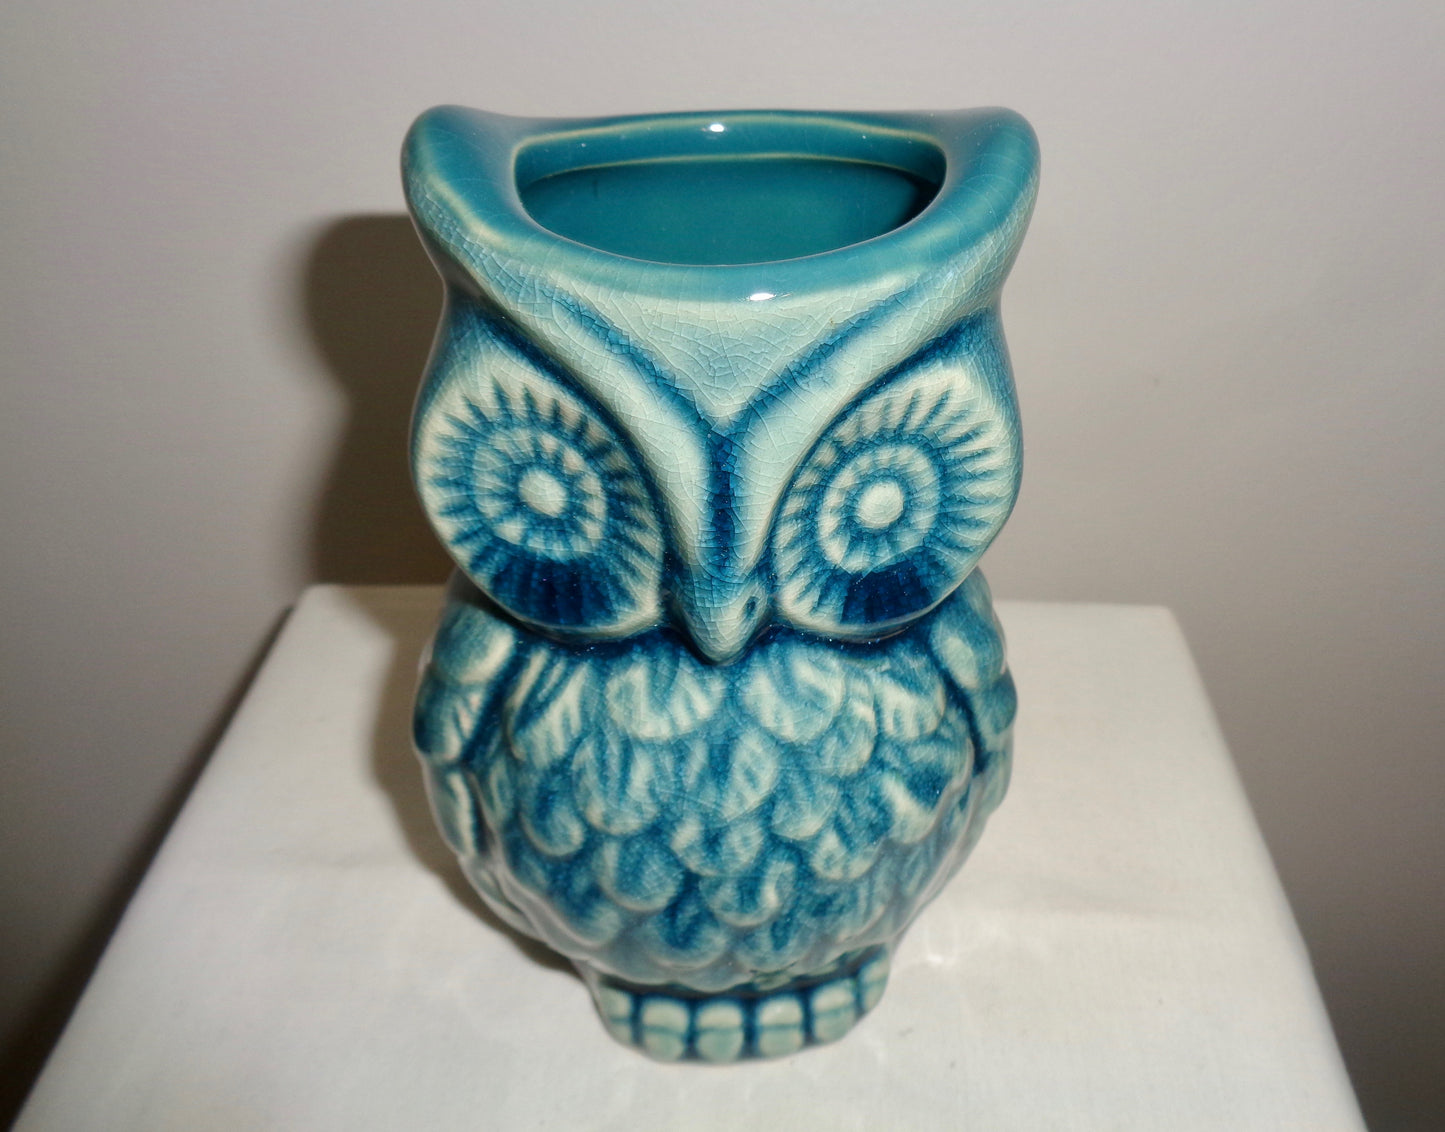 Vintage Turquoise Pottery Owl Shelley Style Desk Ornament